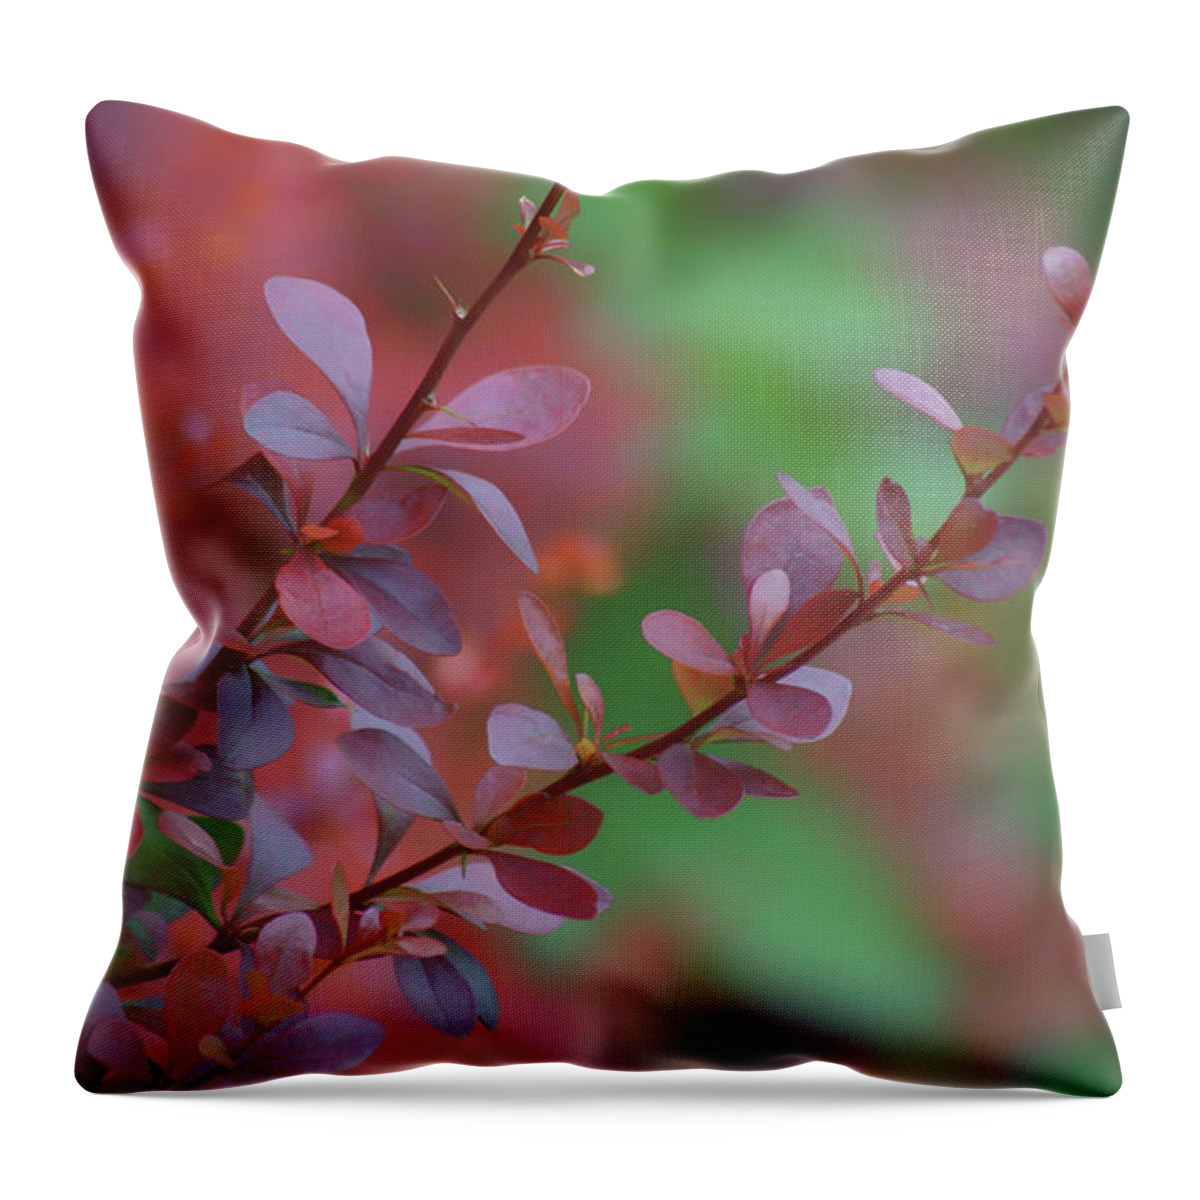 Leaves Throw Pillow featuring the photograph Barberry - Leaves by Nikolyn McDonald